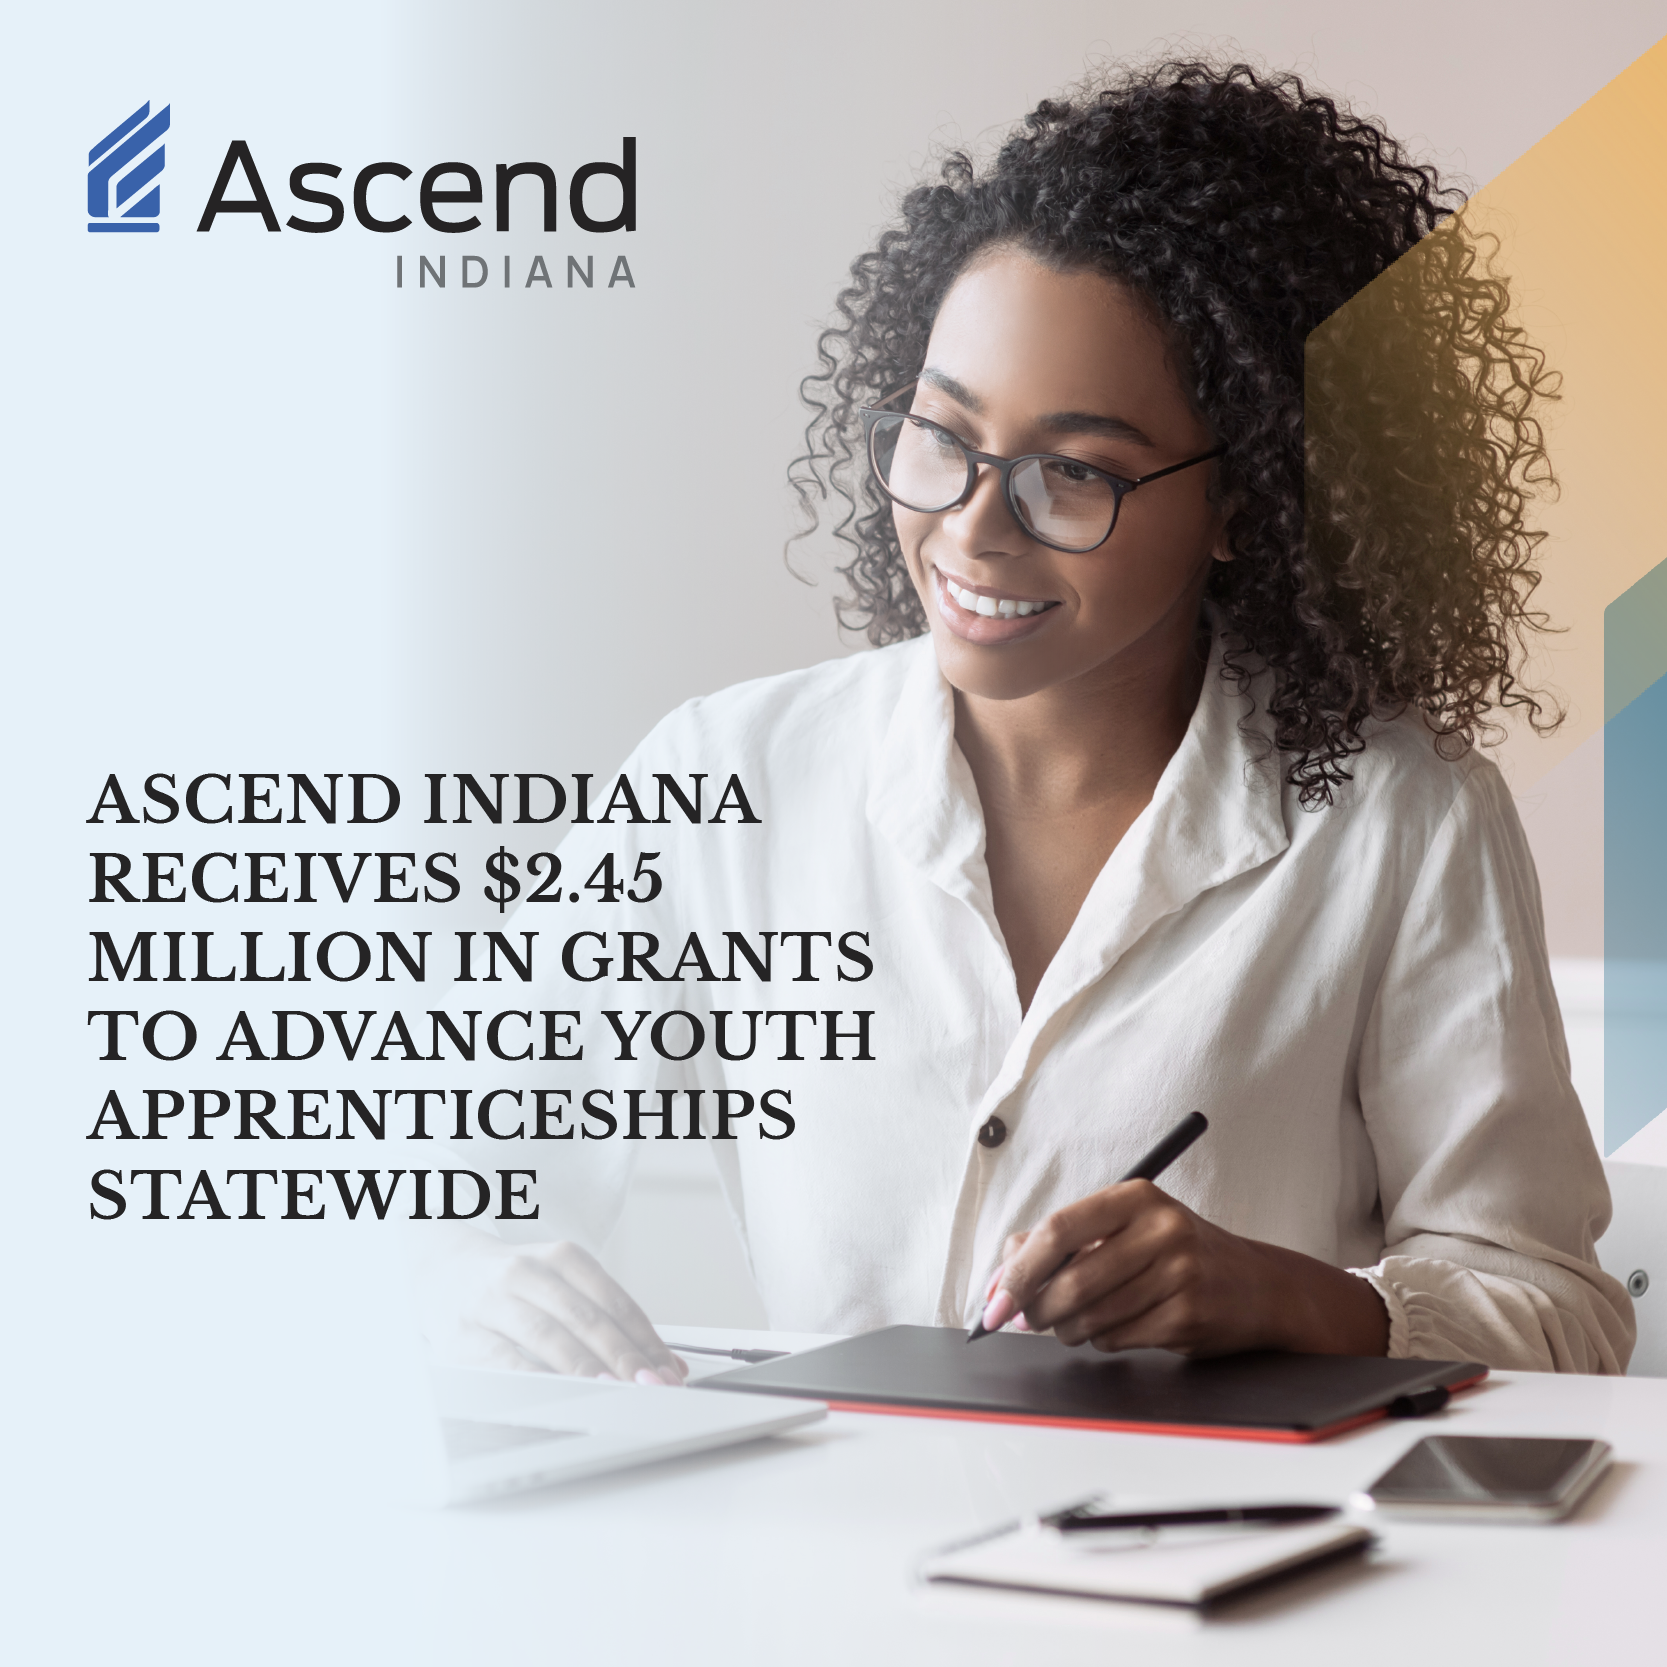 Ascend Indiana receives $2.45 million in grants to advance youth apprenticeships statewide